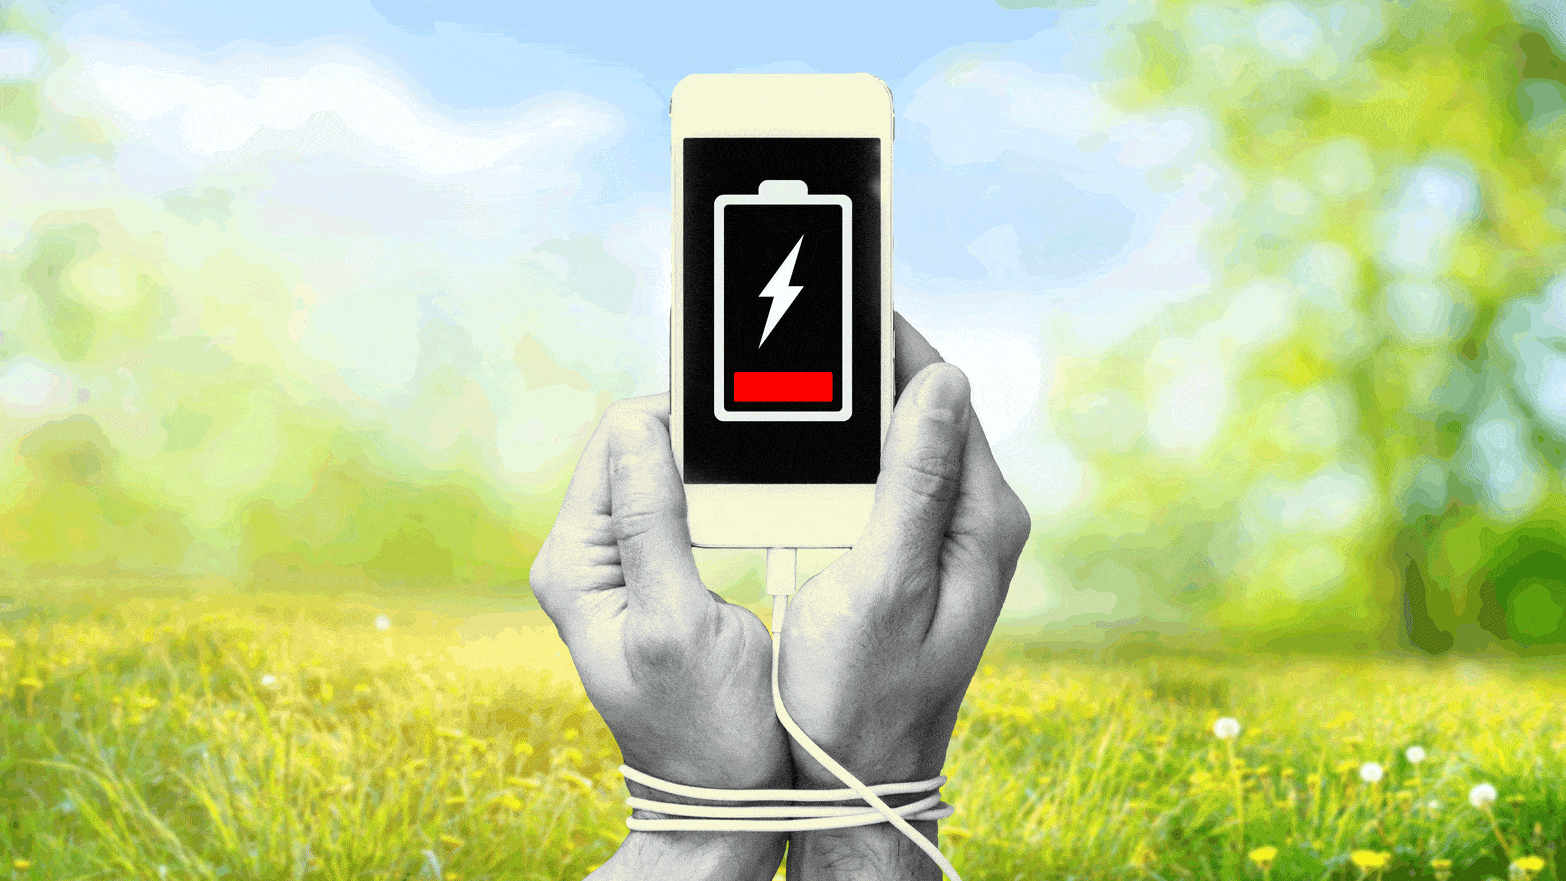 A photo illustration of a person holding a smartphone with a dead battery.